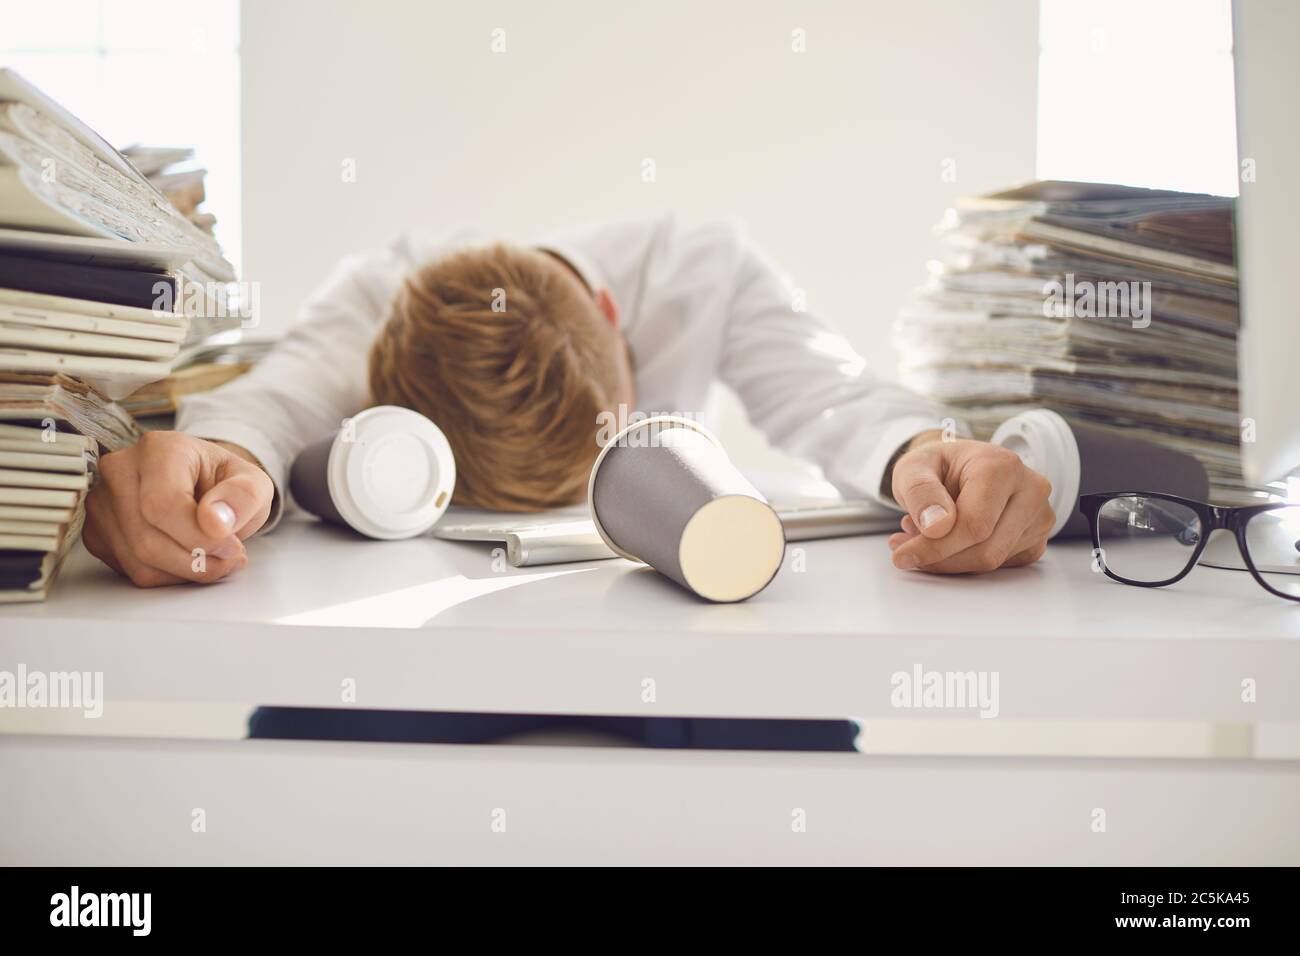 Tired busy businessman sleeping at a table with a computer. Stock Photo